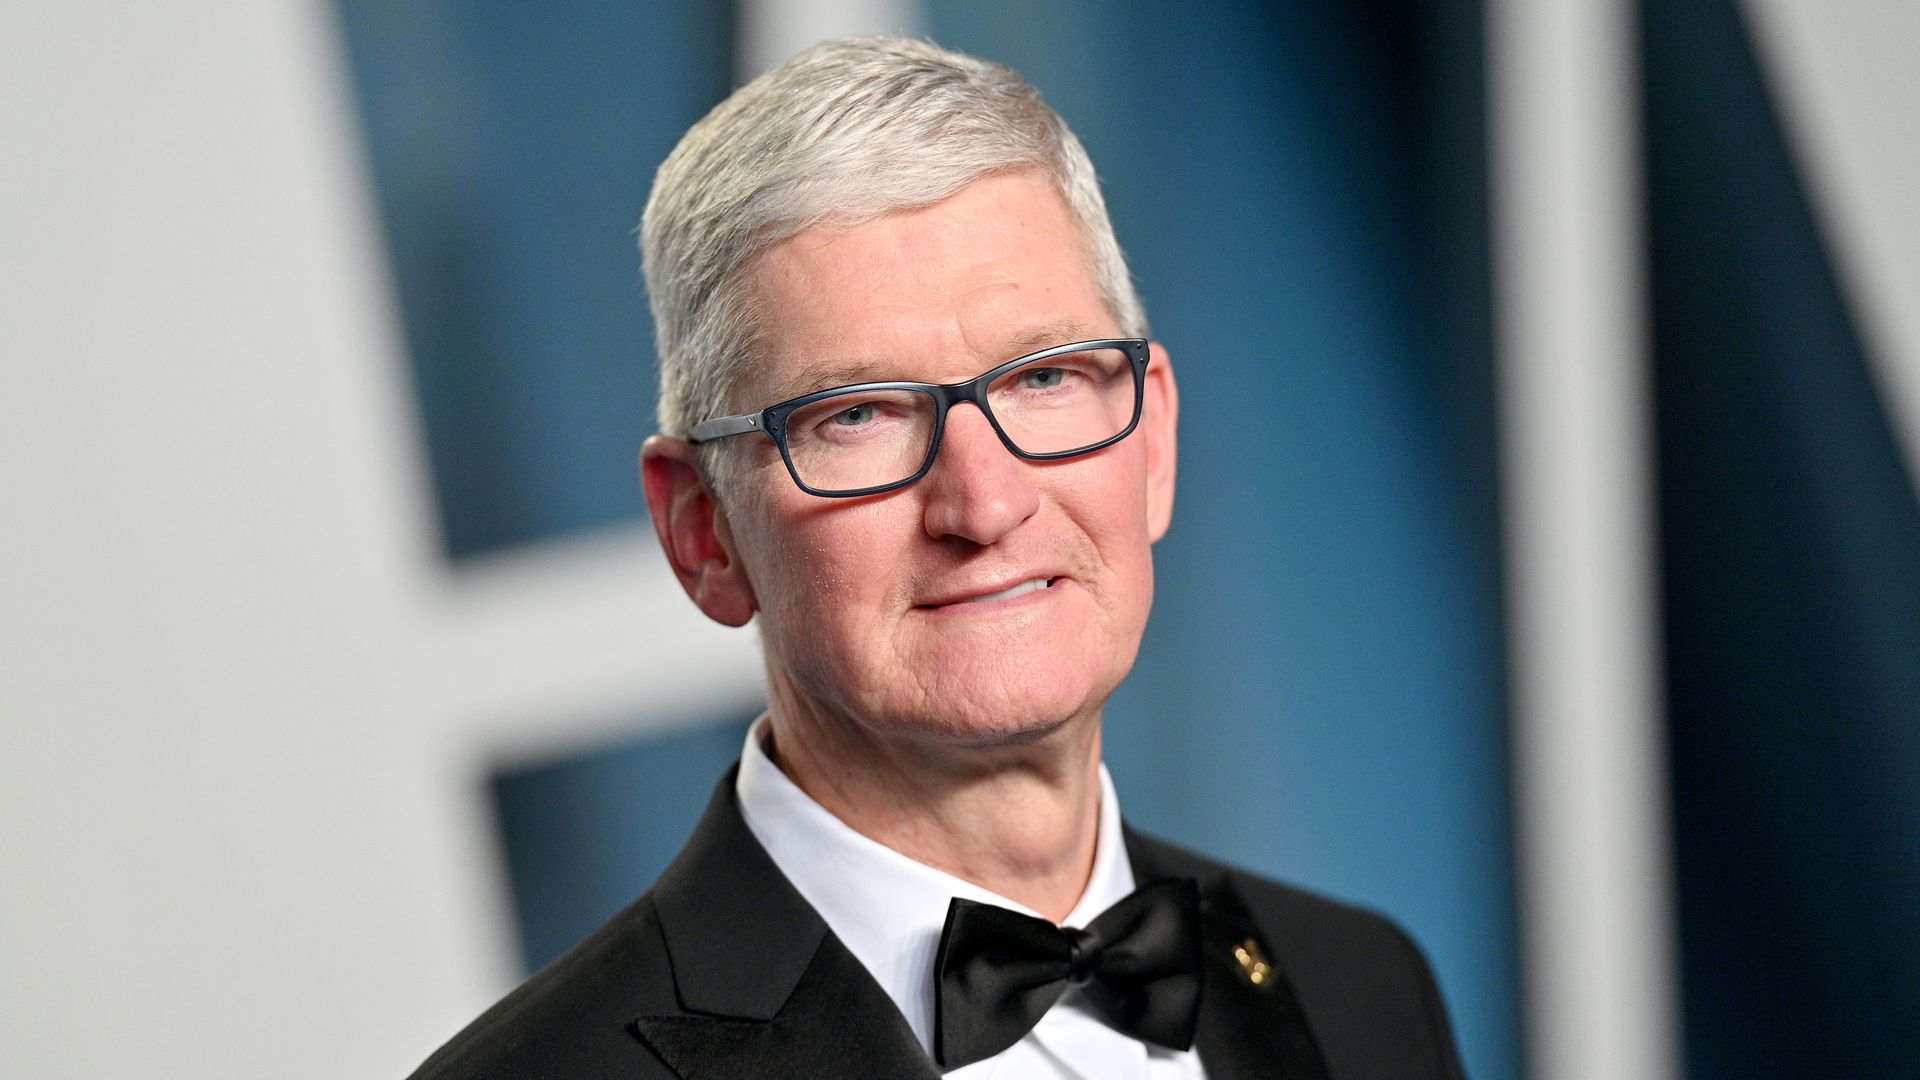 Photo of Tim Cook in formal wear